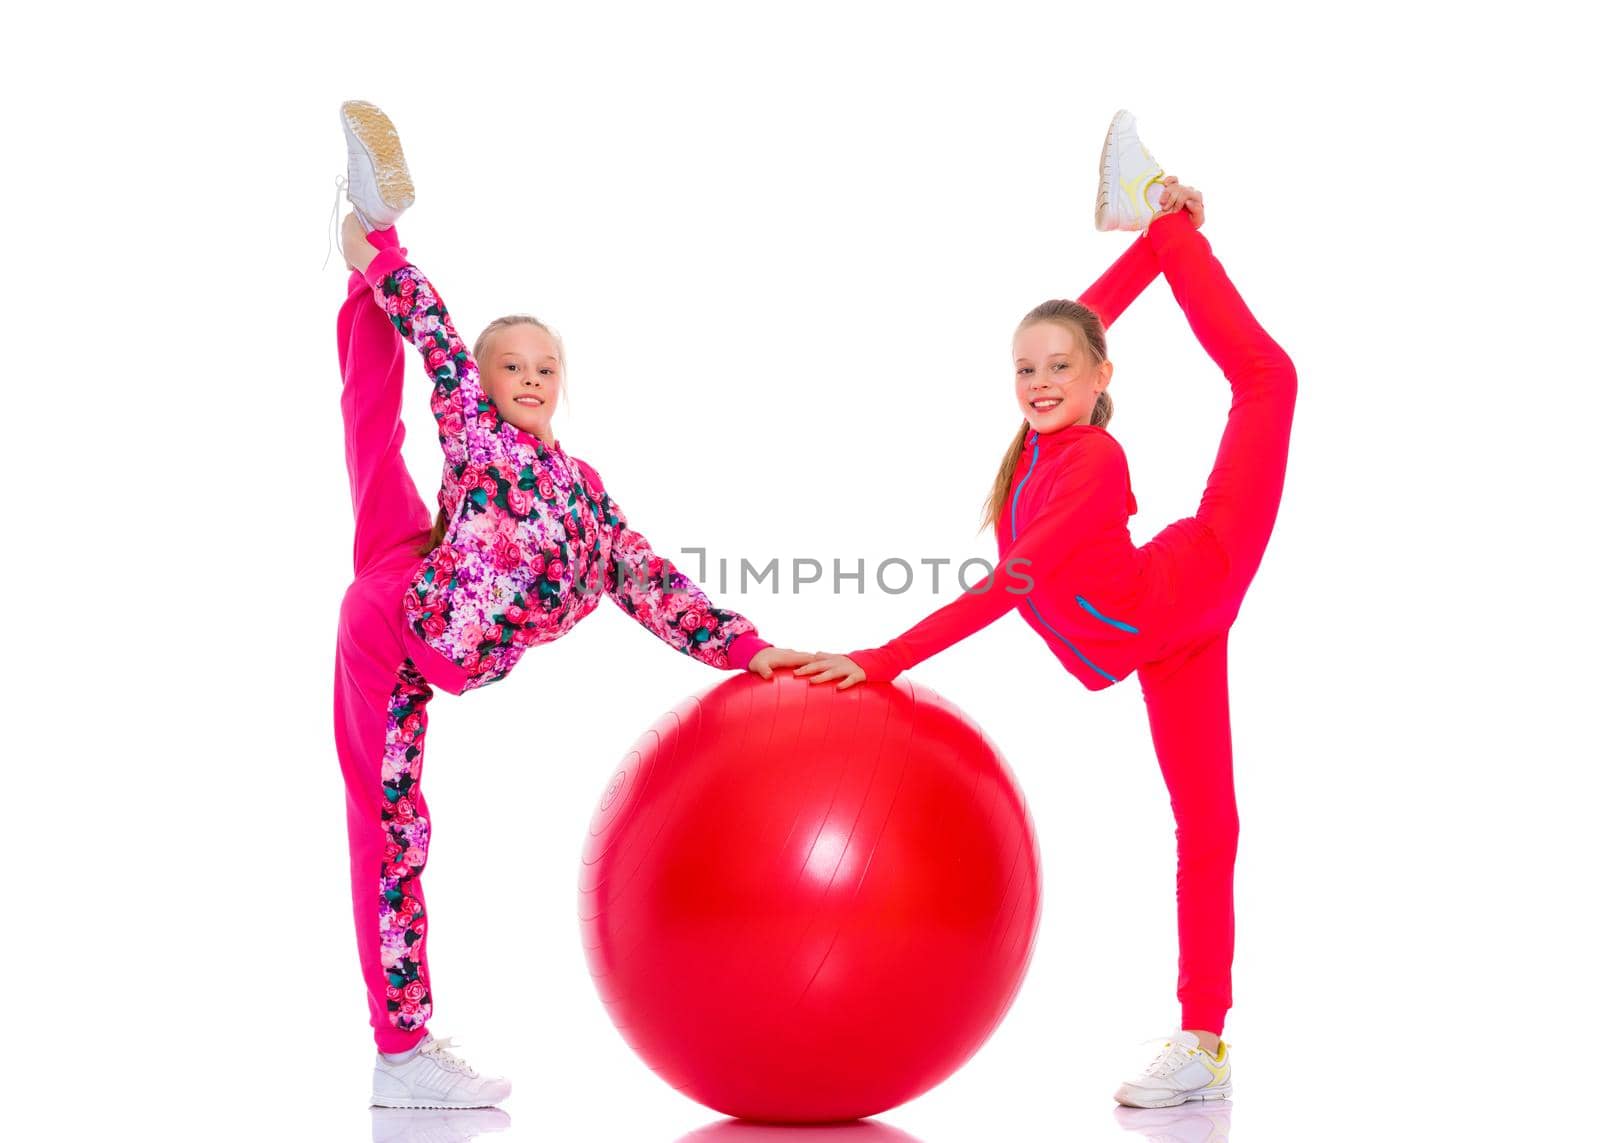 Jolly girls gymnasts perform exercises with a large ball for fitness. The concept of children's sport, a healthy lifestyle. Isolated on white background.